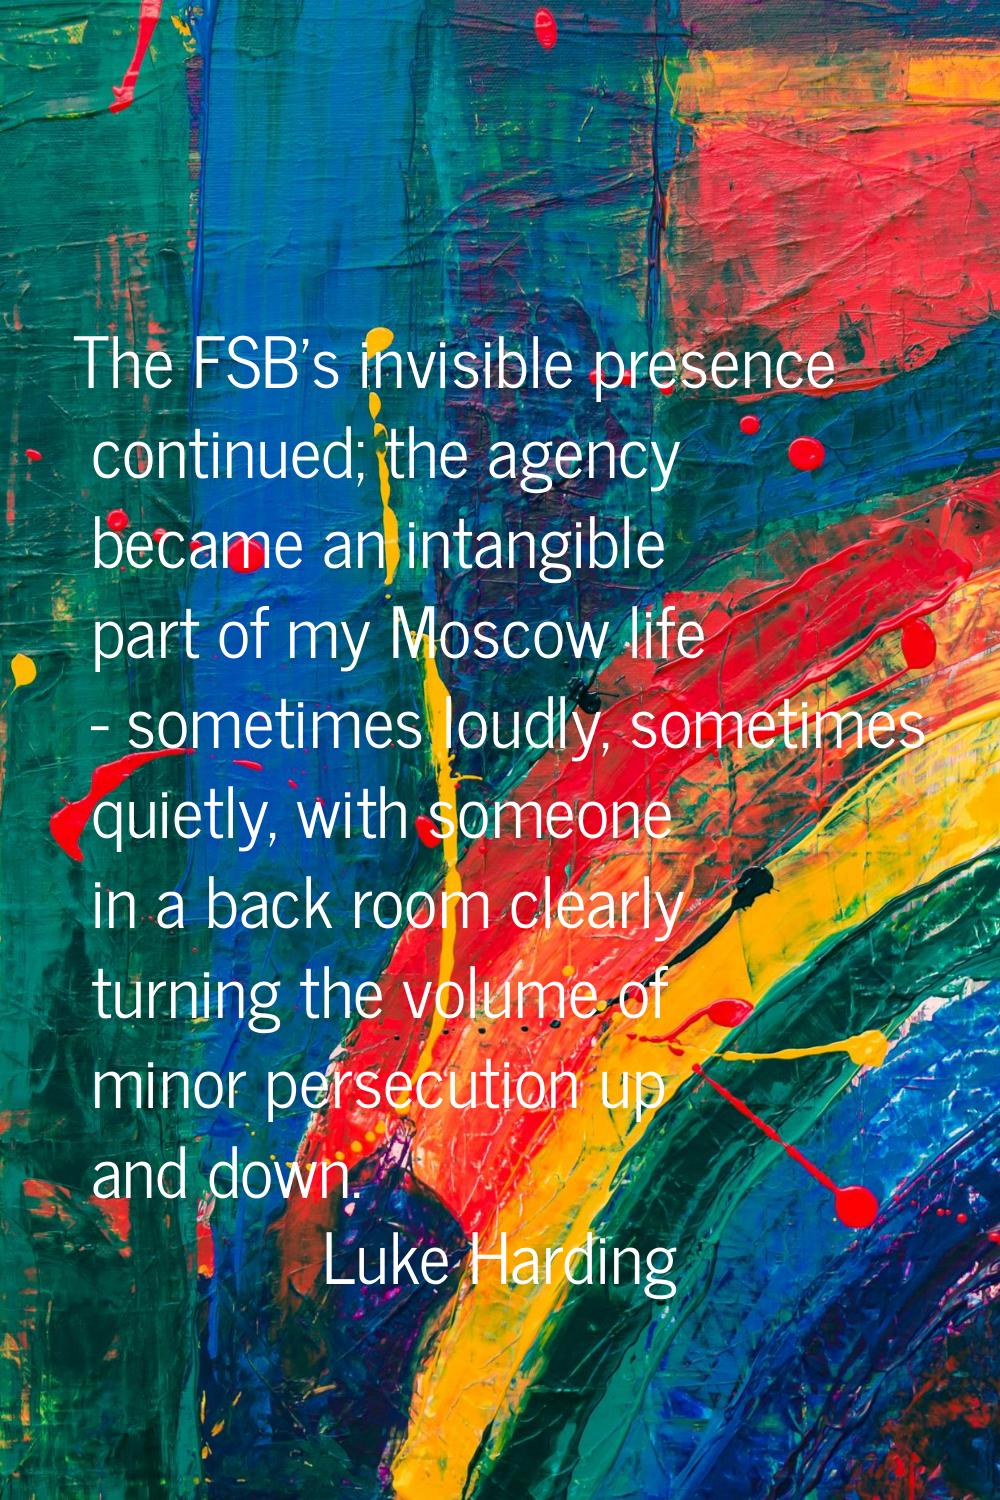 The FSB's invisible presence continued; the agency became an intangible part of my Moscow life - so